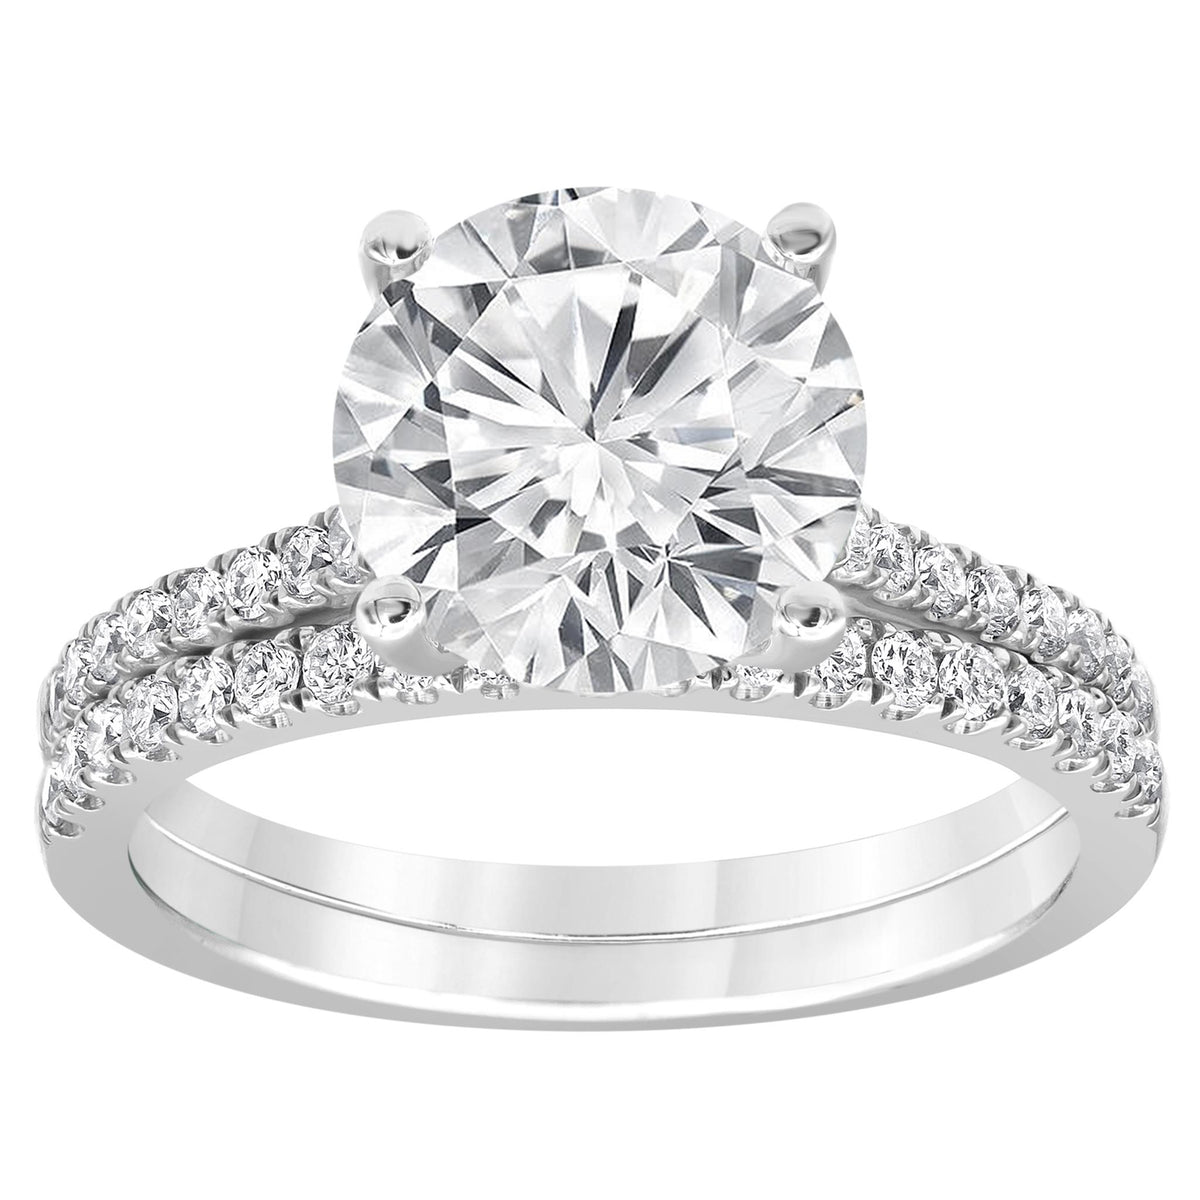 14Kt White Gold Classic Prong Engagement And Wedding Ring Set With 3.30ct Lab-Grown Center Diamond